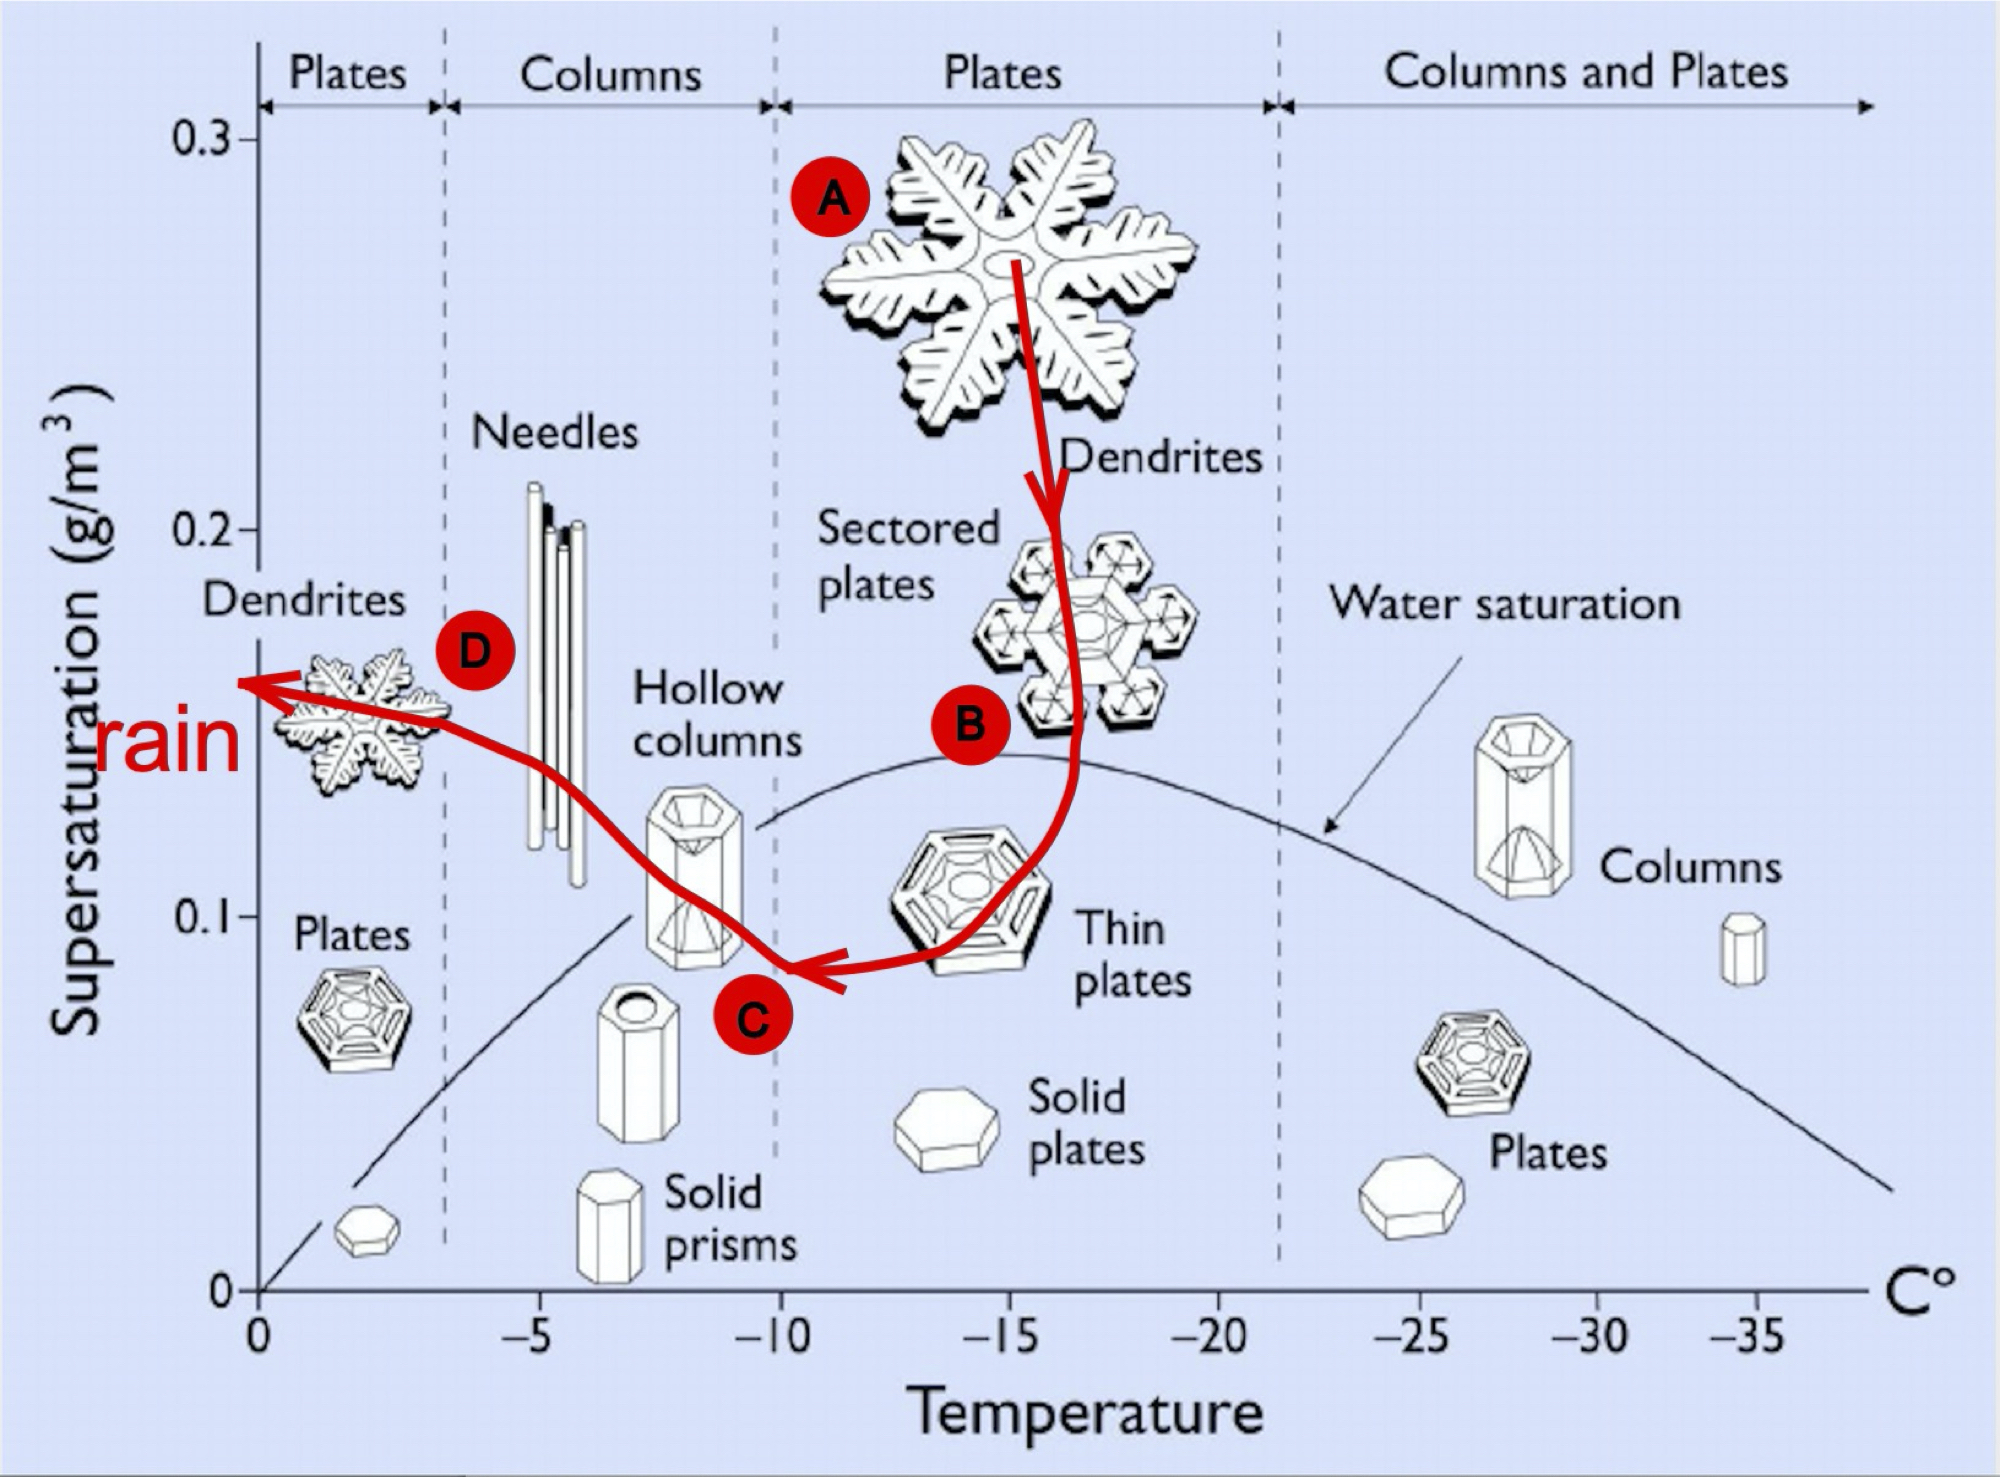 A Nakaya diagram showing the different shapes of snow crystals formed under different cloud conditions. 